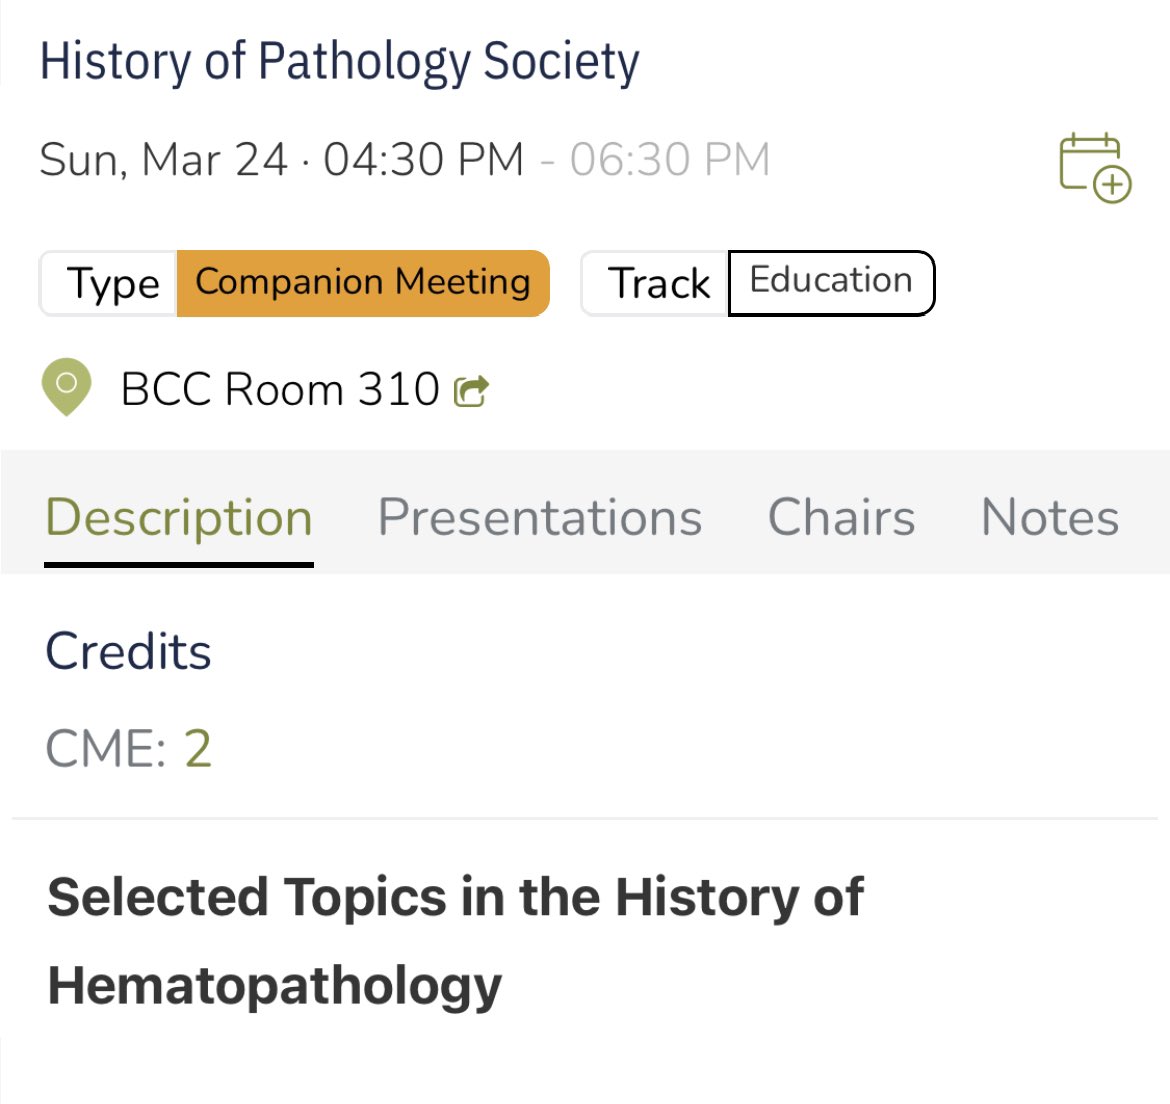 Highlighting @MSKPathology at #USCAP2024 Companion Society Mtgs 3/24 Dr. Mariko Yabe: “History & Evolution of Rosai-Dorfman Disease” in @HistPathSoc session focused on Selected Topics in the History of Hematopathology